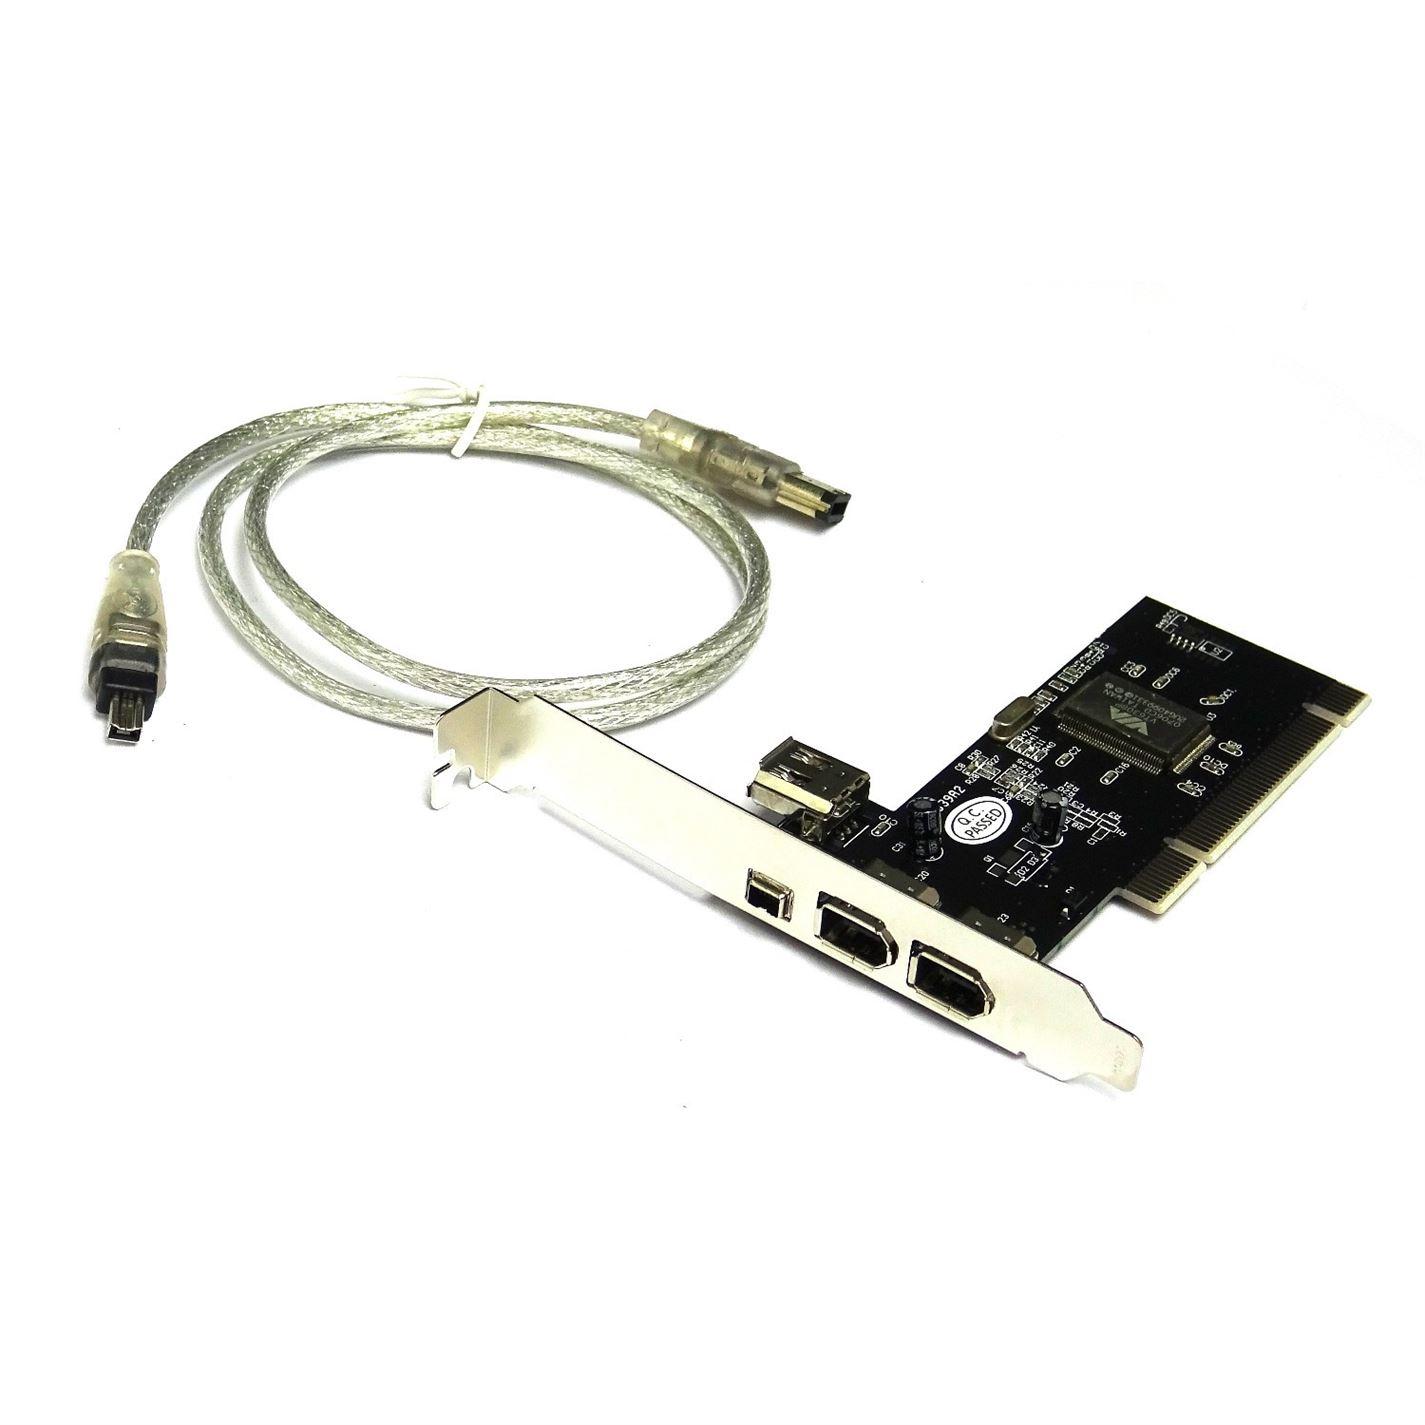 PCI FireWire IEEE 1394 3 + 1 Port Card + 4/6 Pin Cable - UK Seller